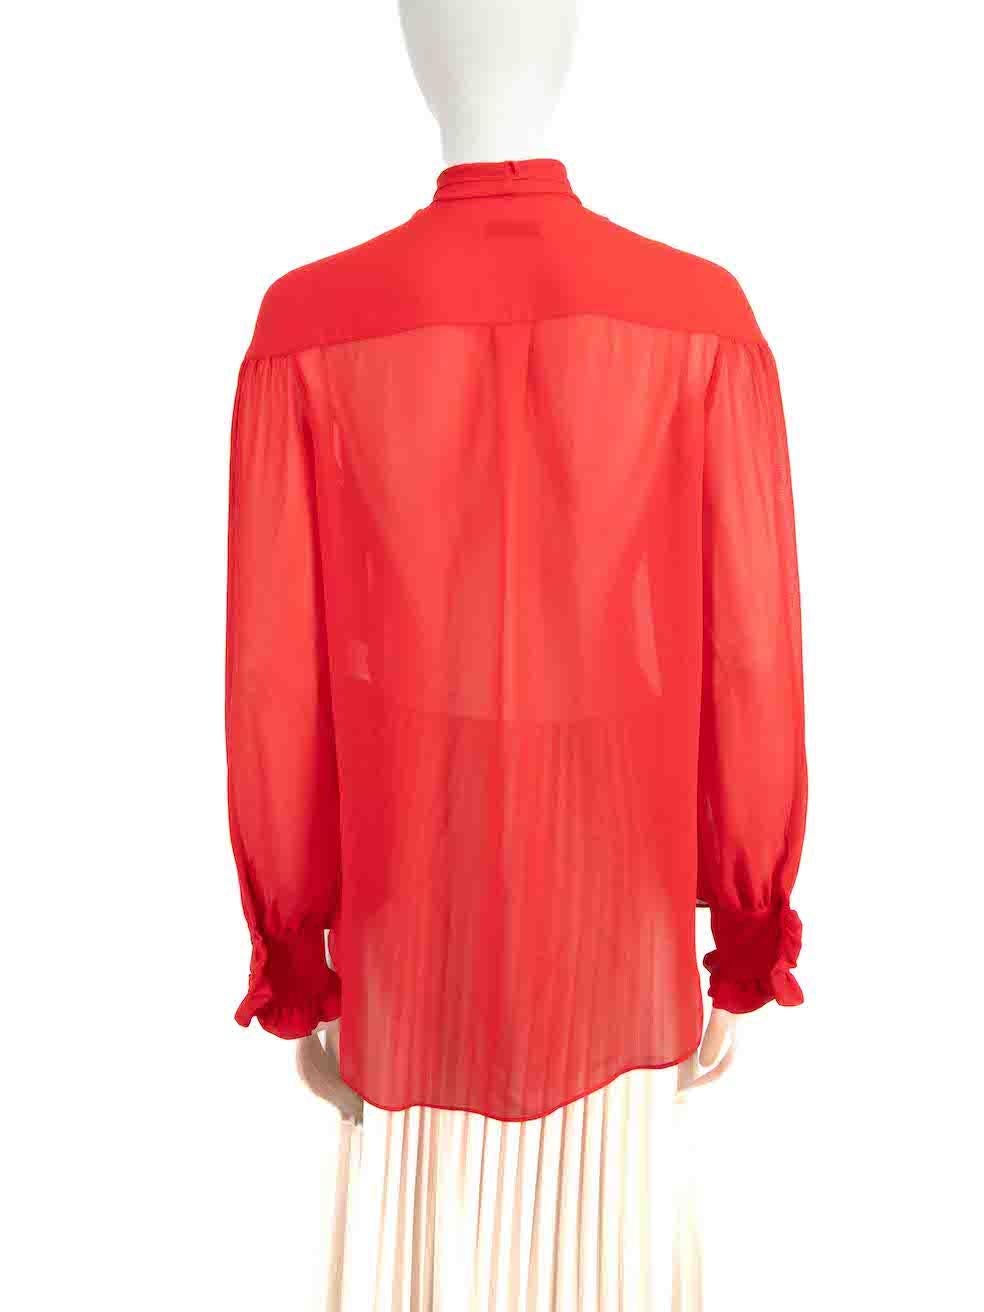 Rejina Pyo Red Sheer Front-Tie Shirt Size XS In Good Condition For Sale In London, GB